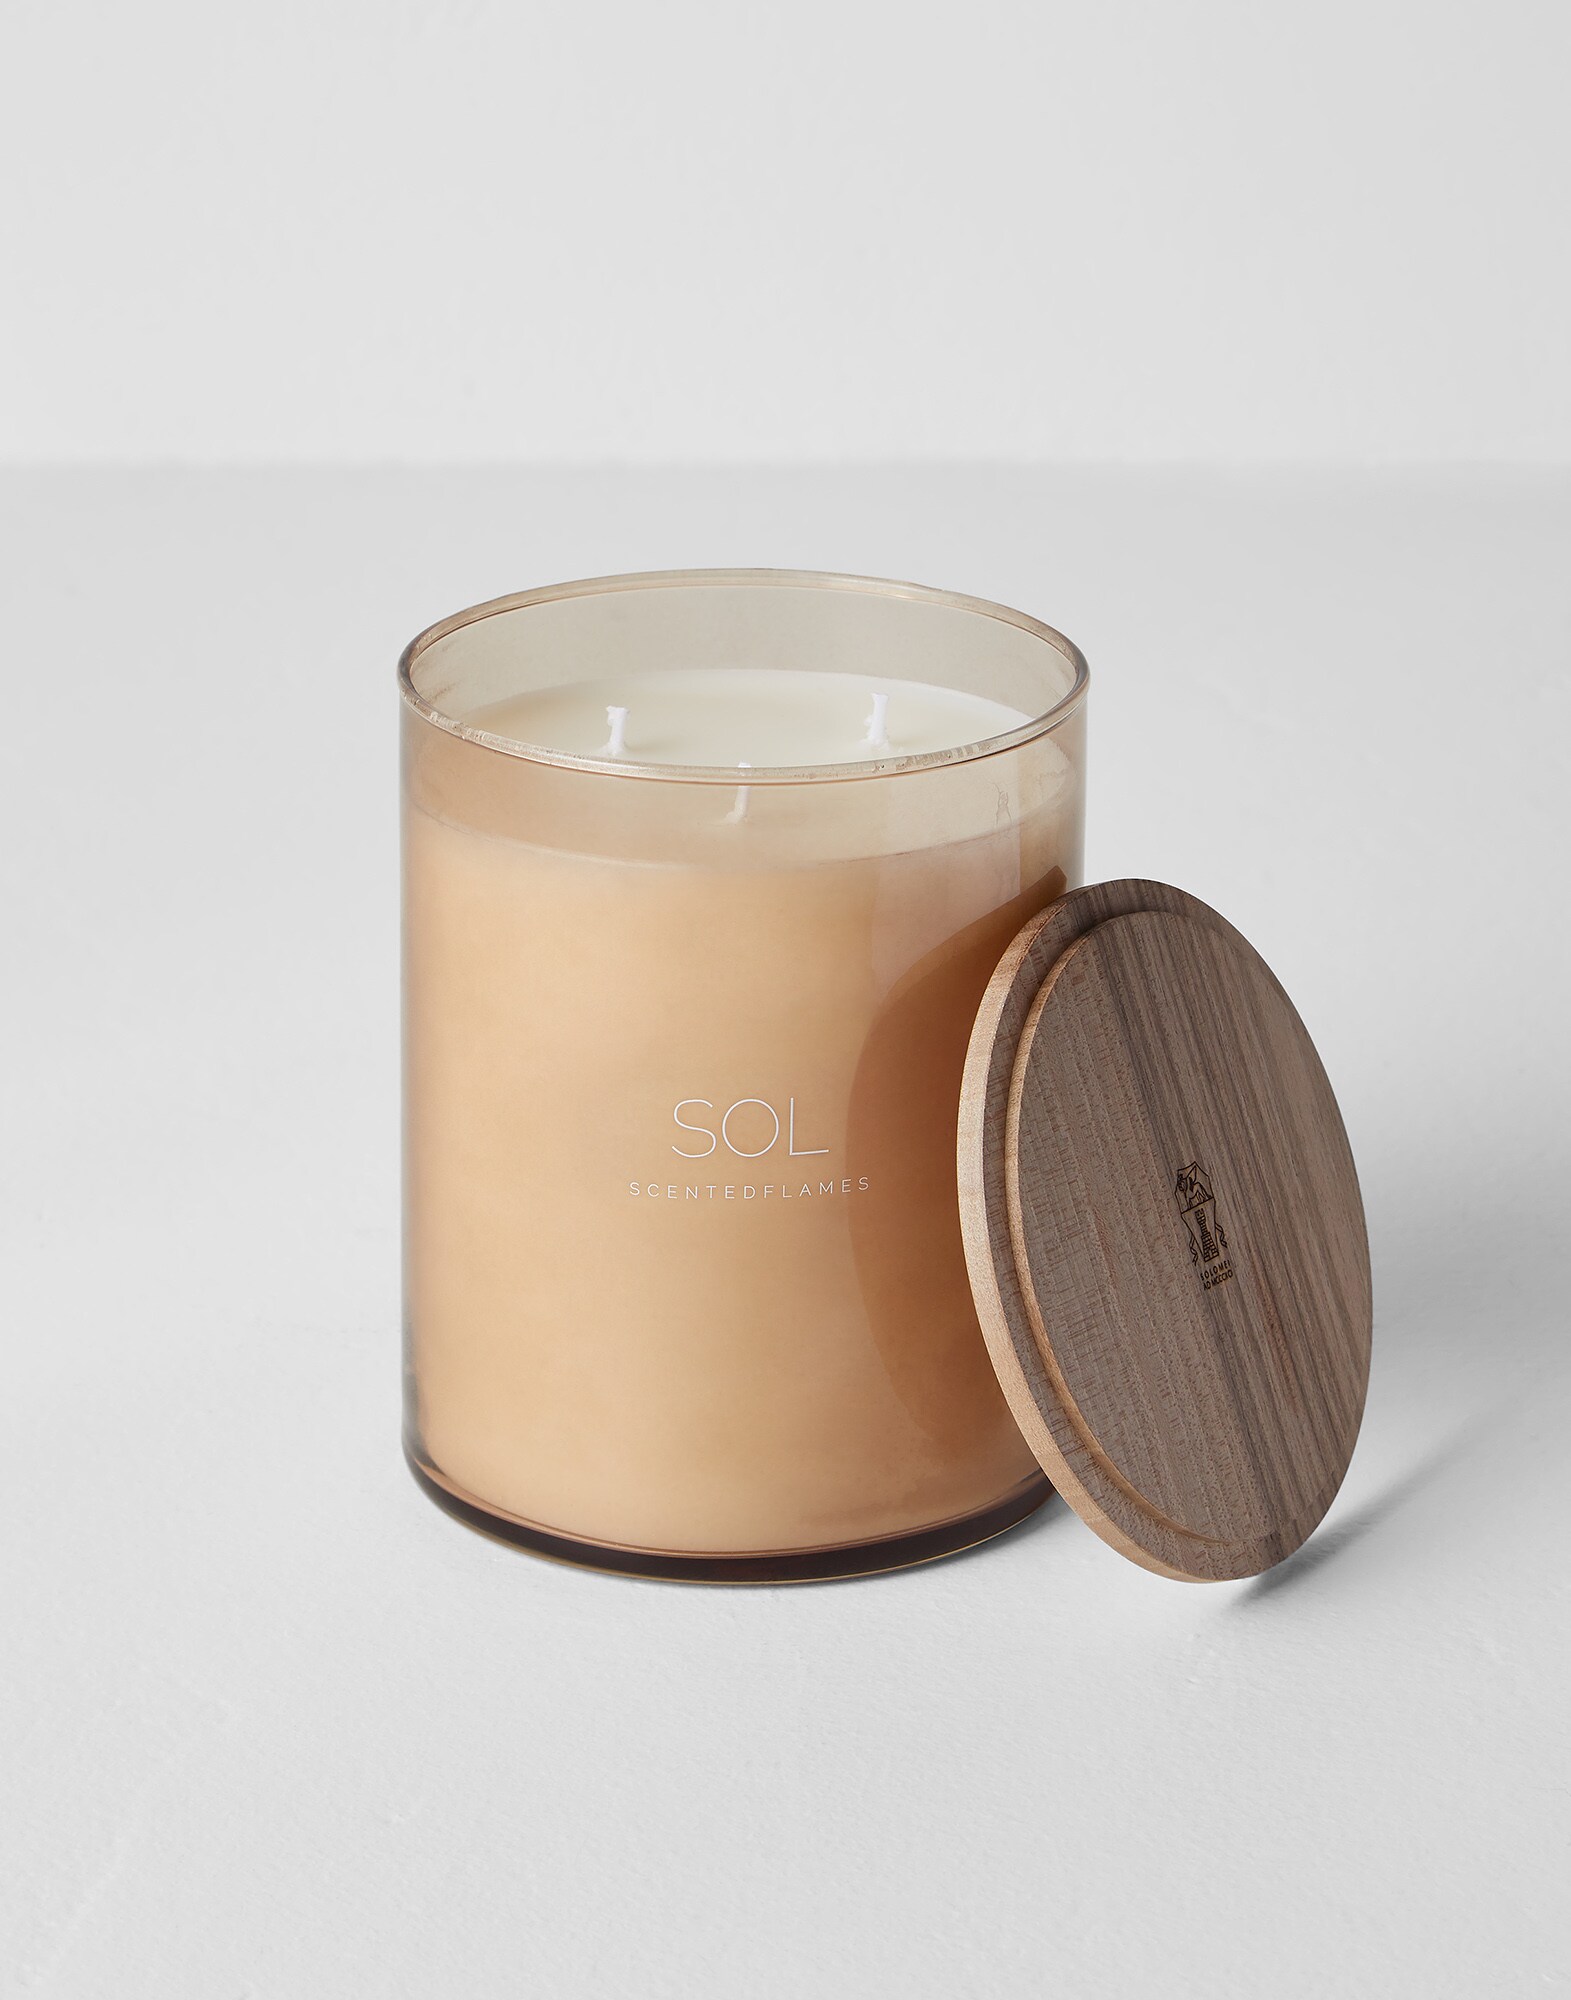 Scented candle with Sol fragrance